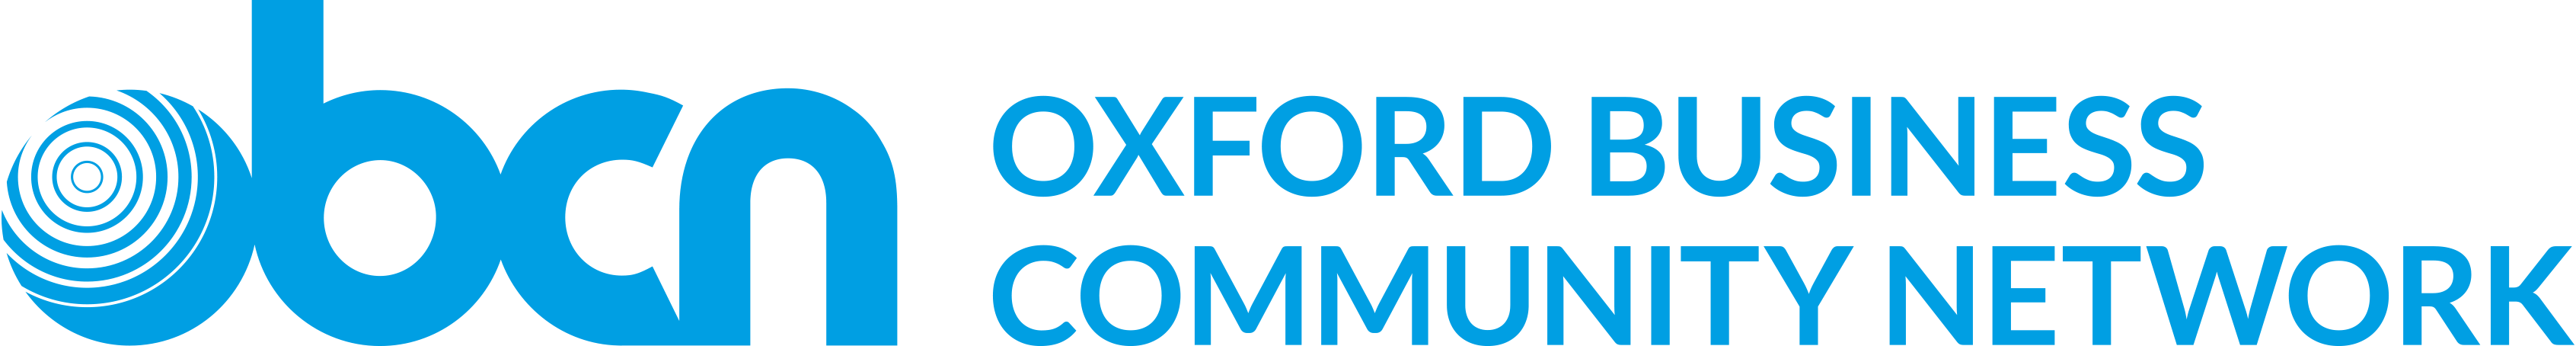 The Oxford Business Community Network